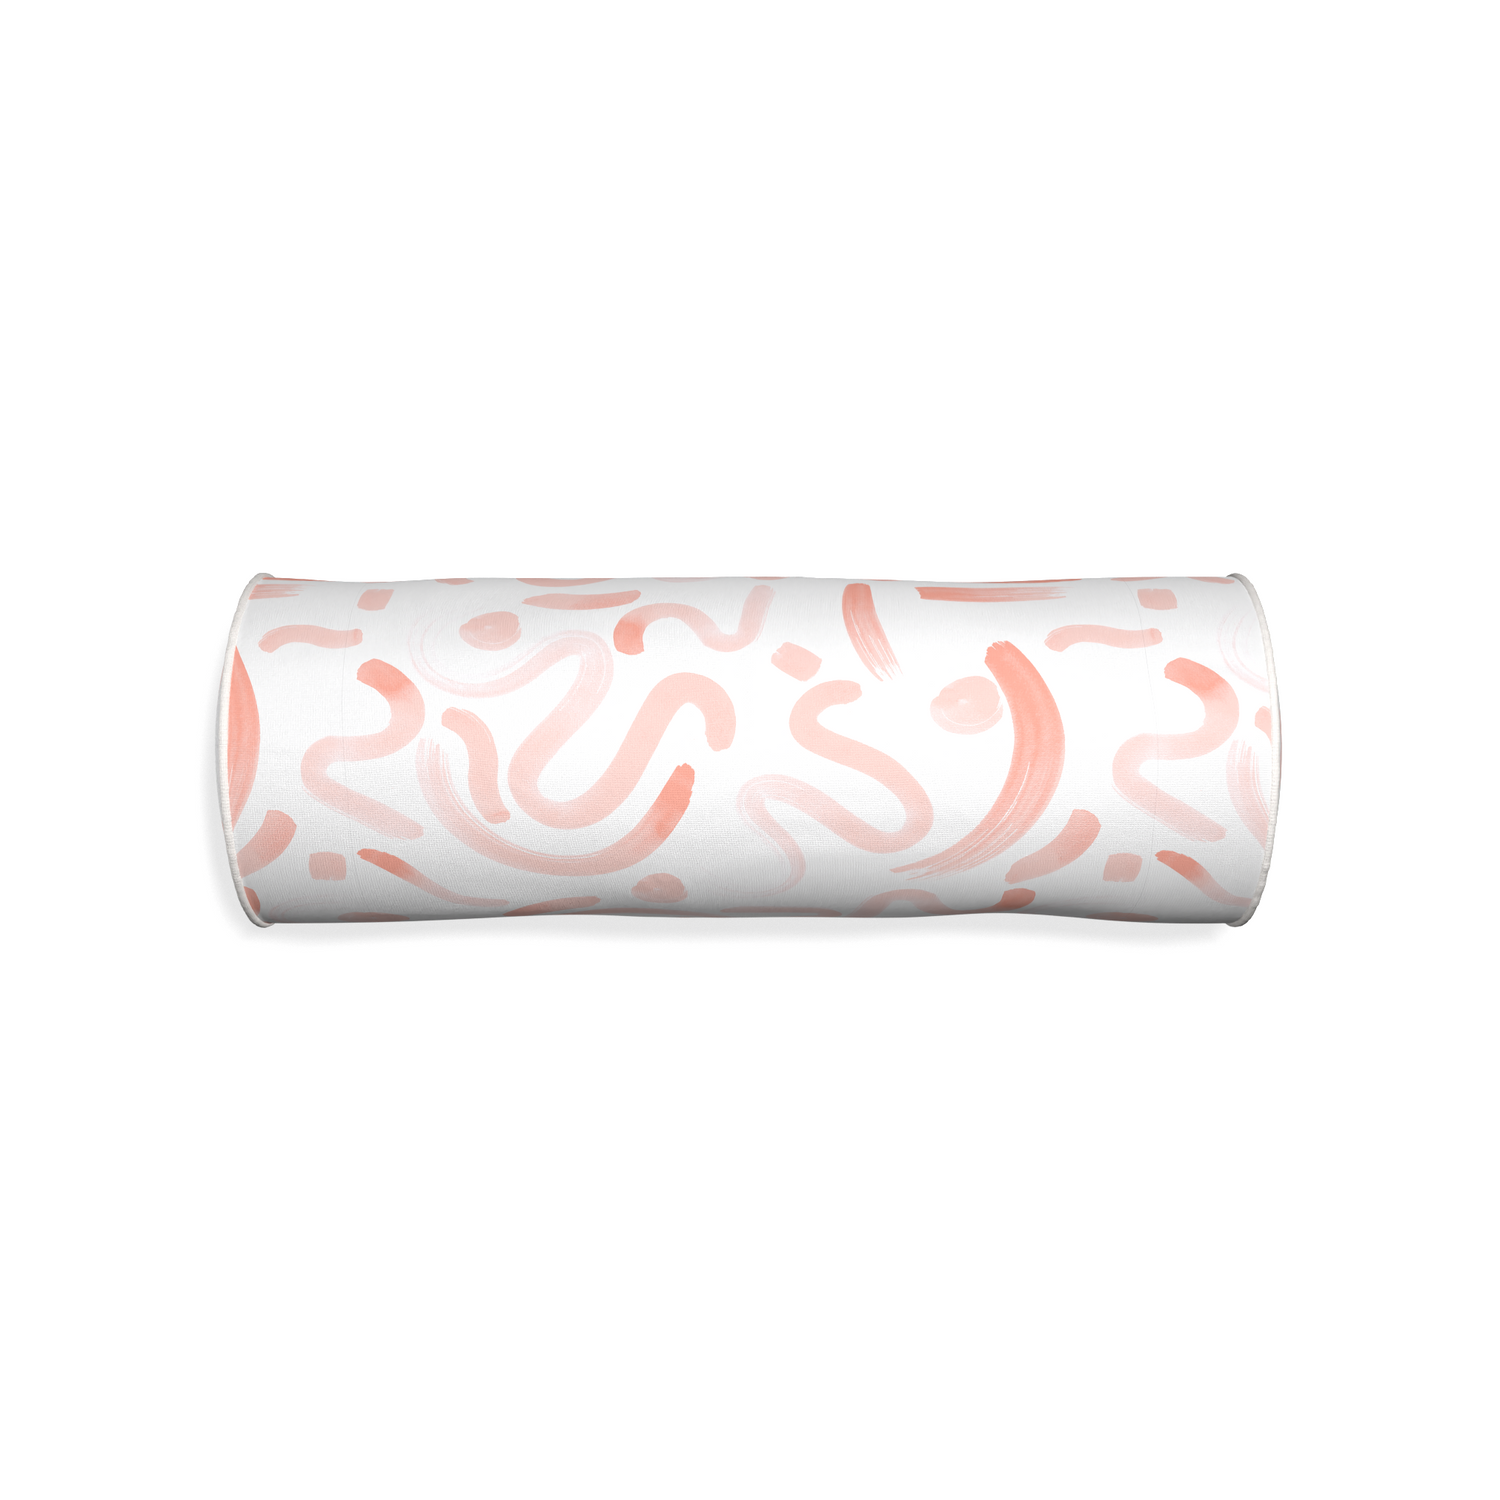 Bolster hockney pink custom pink graphicpillow with snow piping on white background